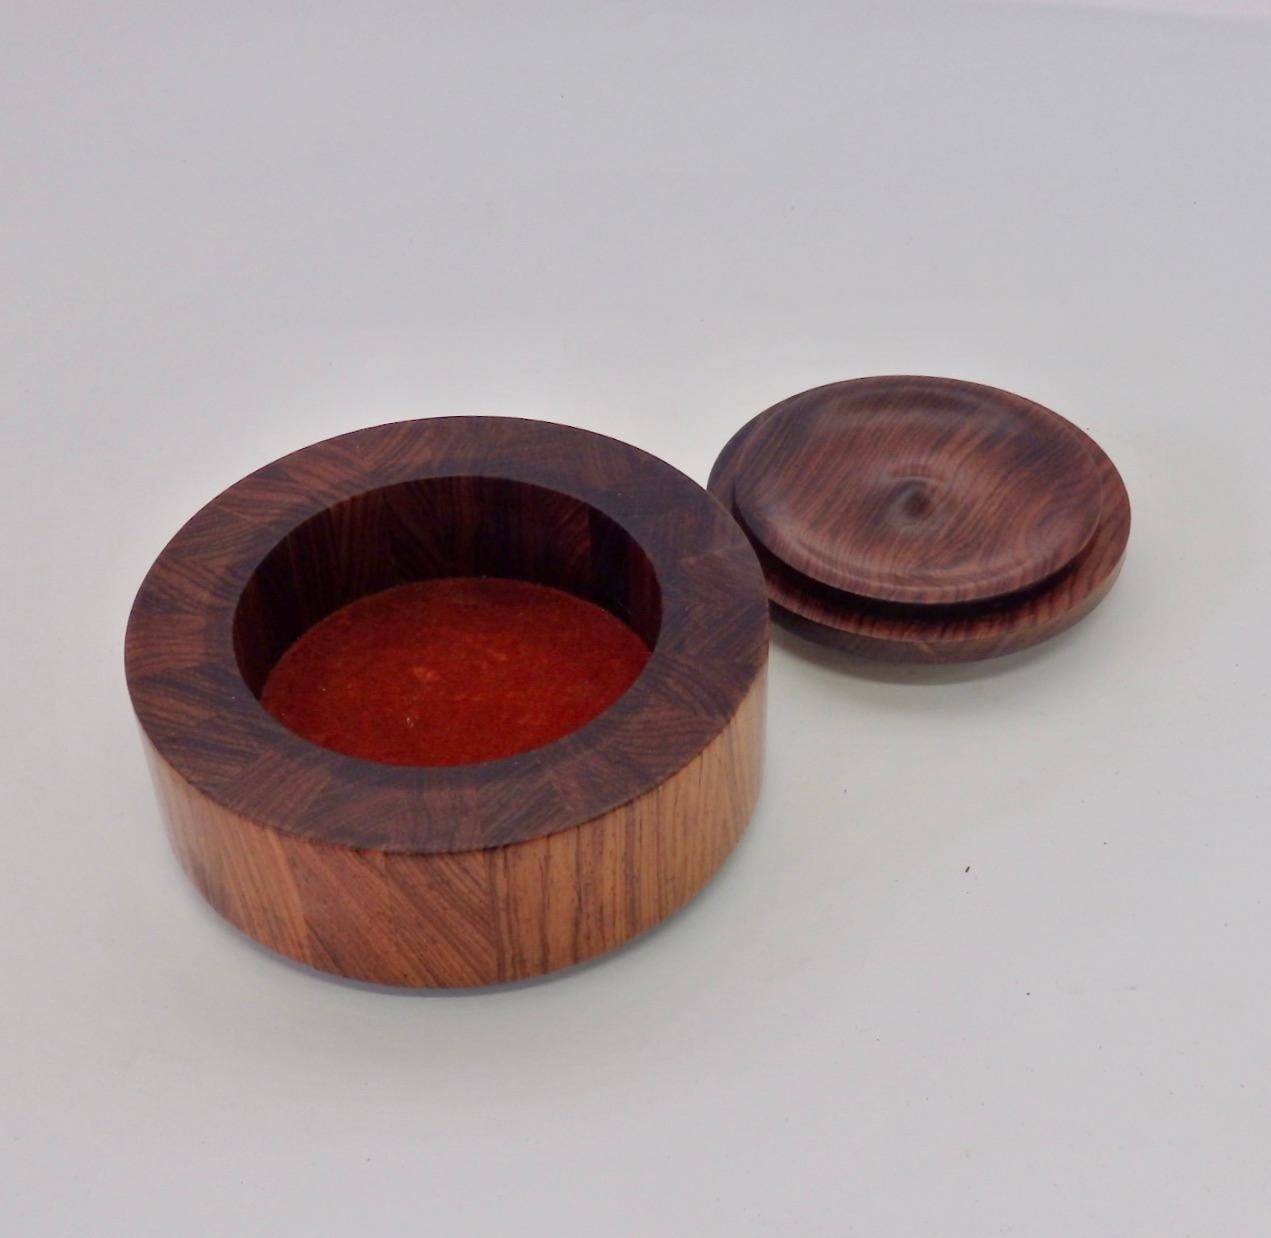 Nicely crafted solid rosewood box with enameled lid.